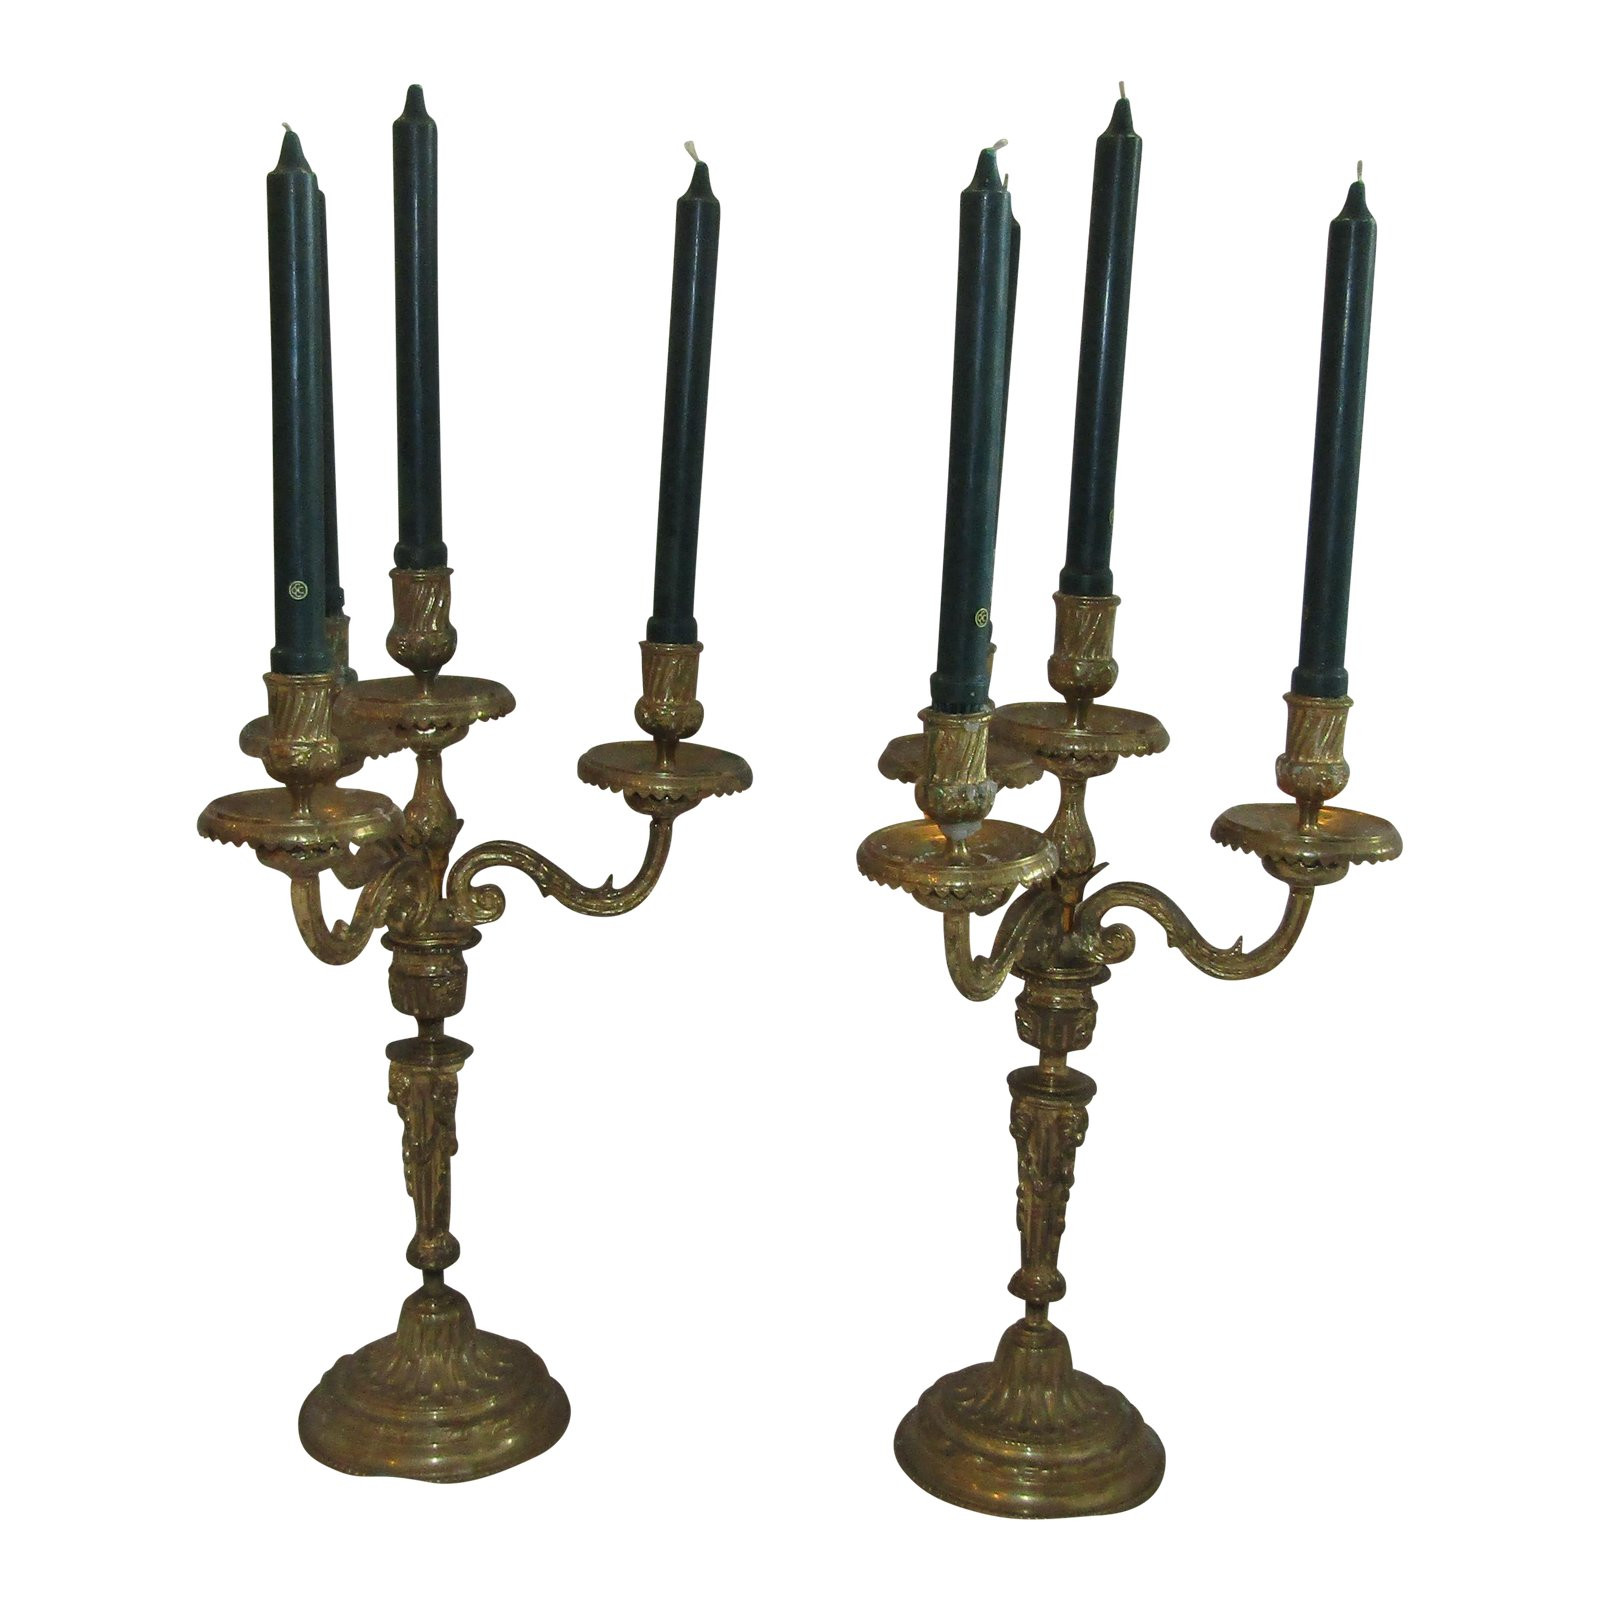 21 Fabulous Maitland Smith Porcelain Vase 2024 free download maitland smith porcelain vase of maitland smith candle holders a pair chairish with regard to maitland smith candle holders a pair 6515